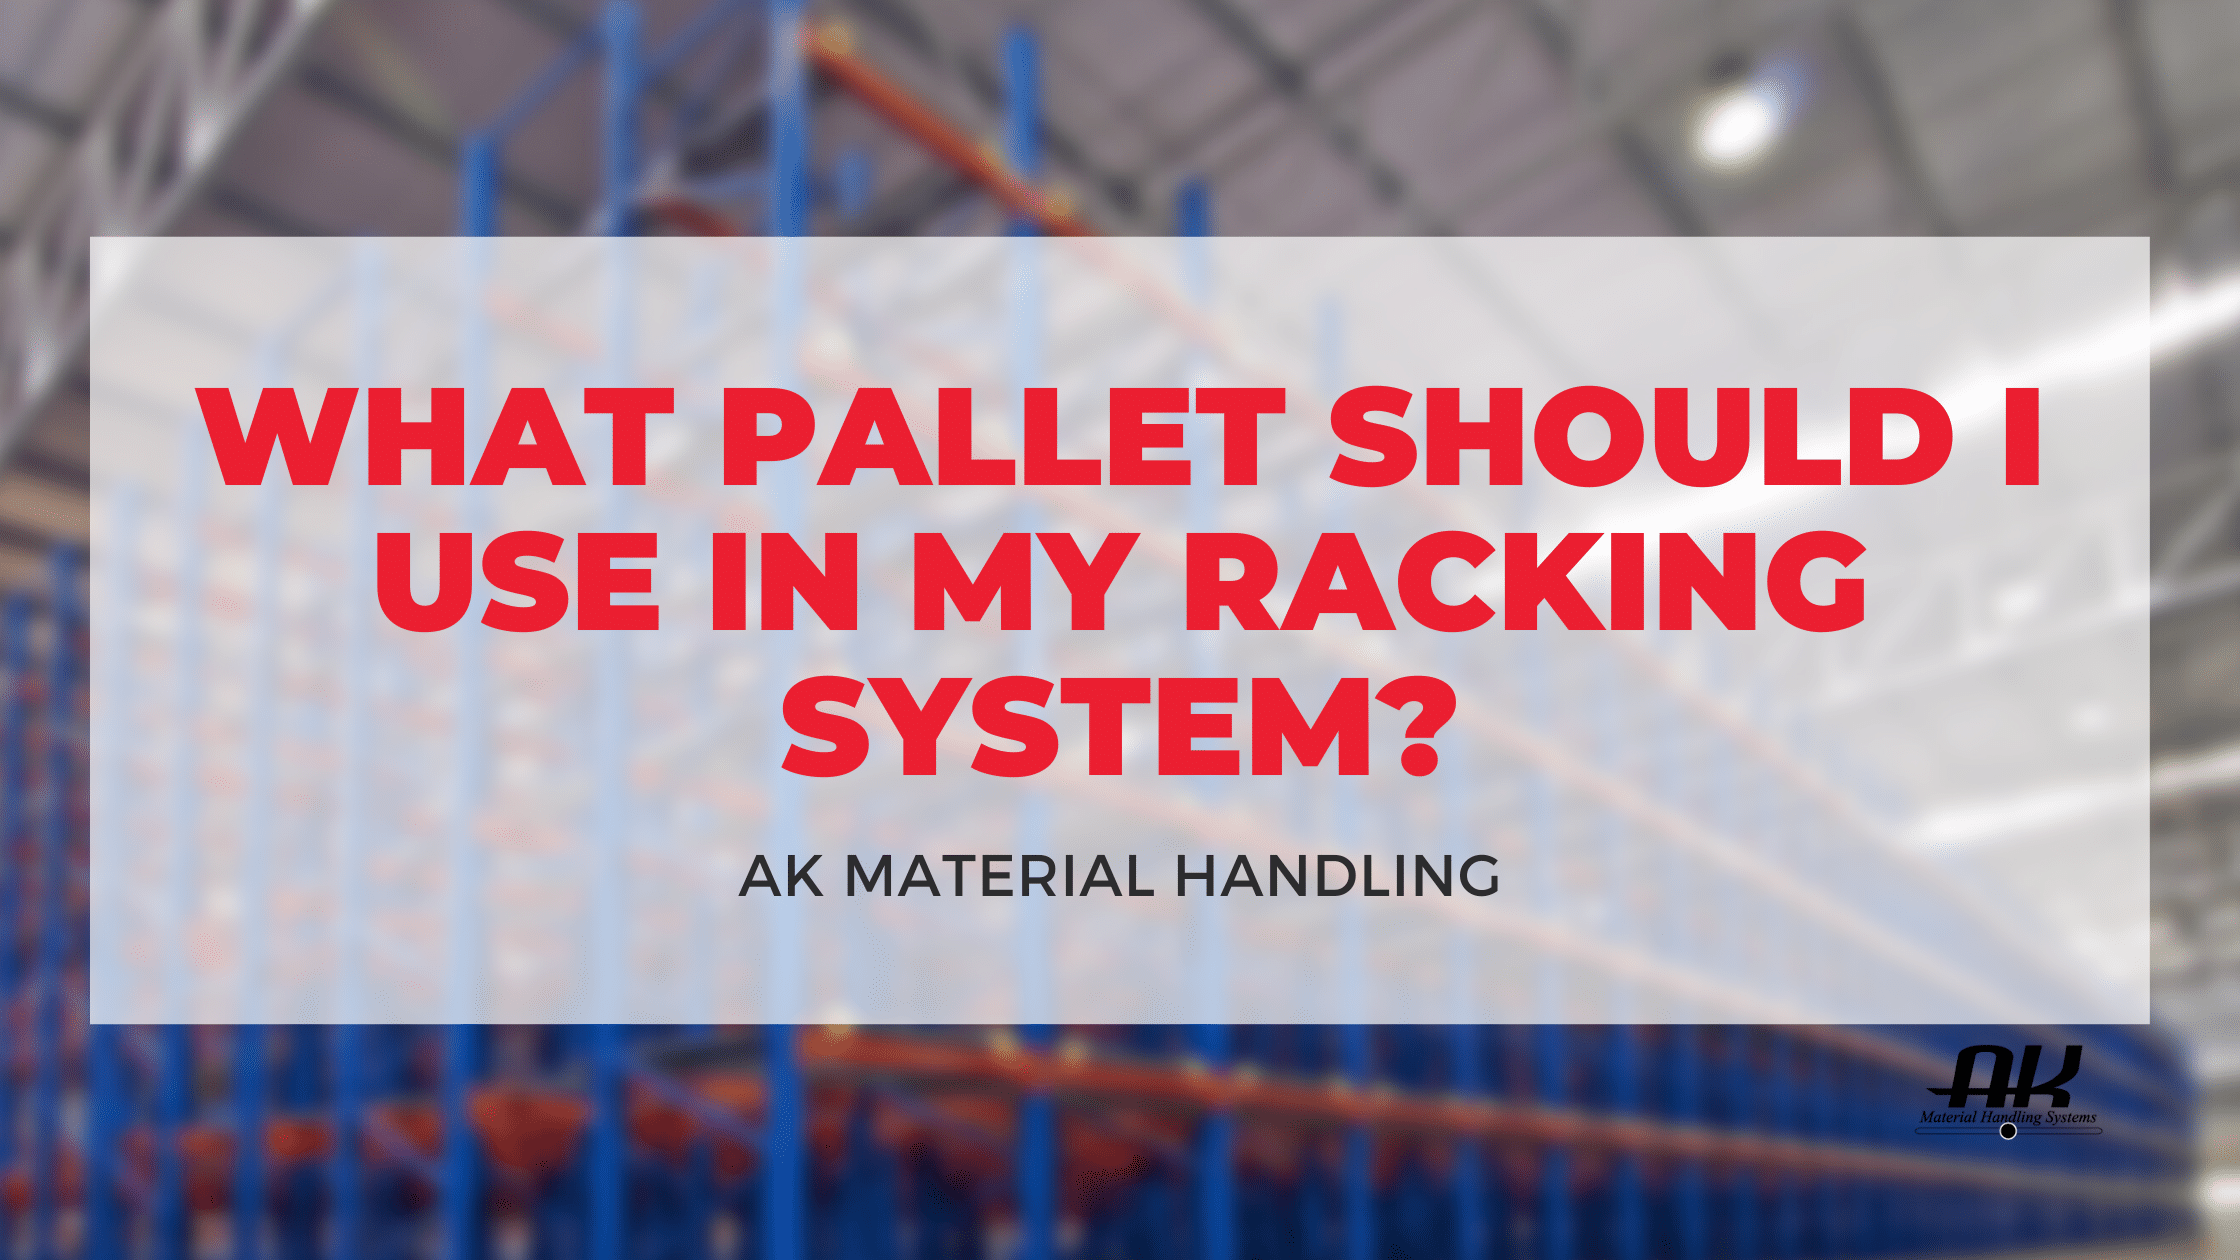 What Pallet Should I Use In My Racking System?